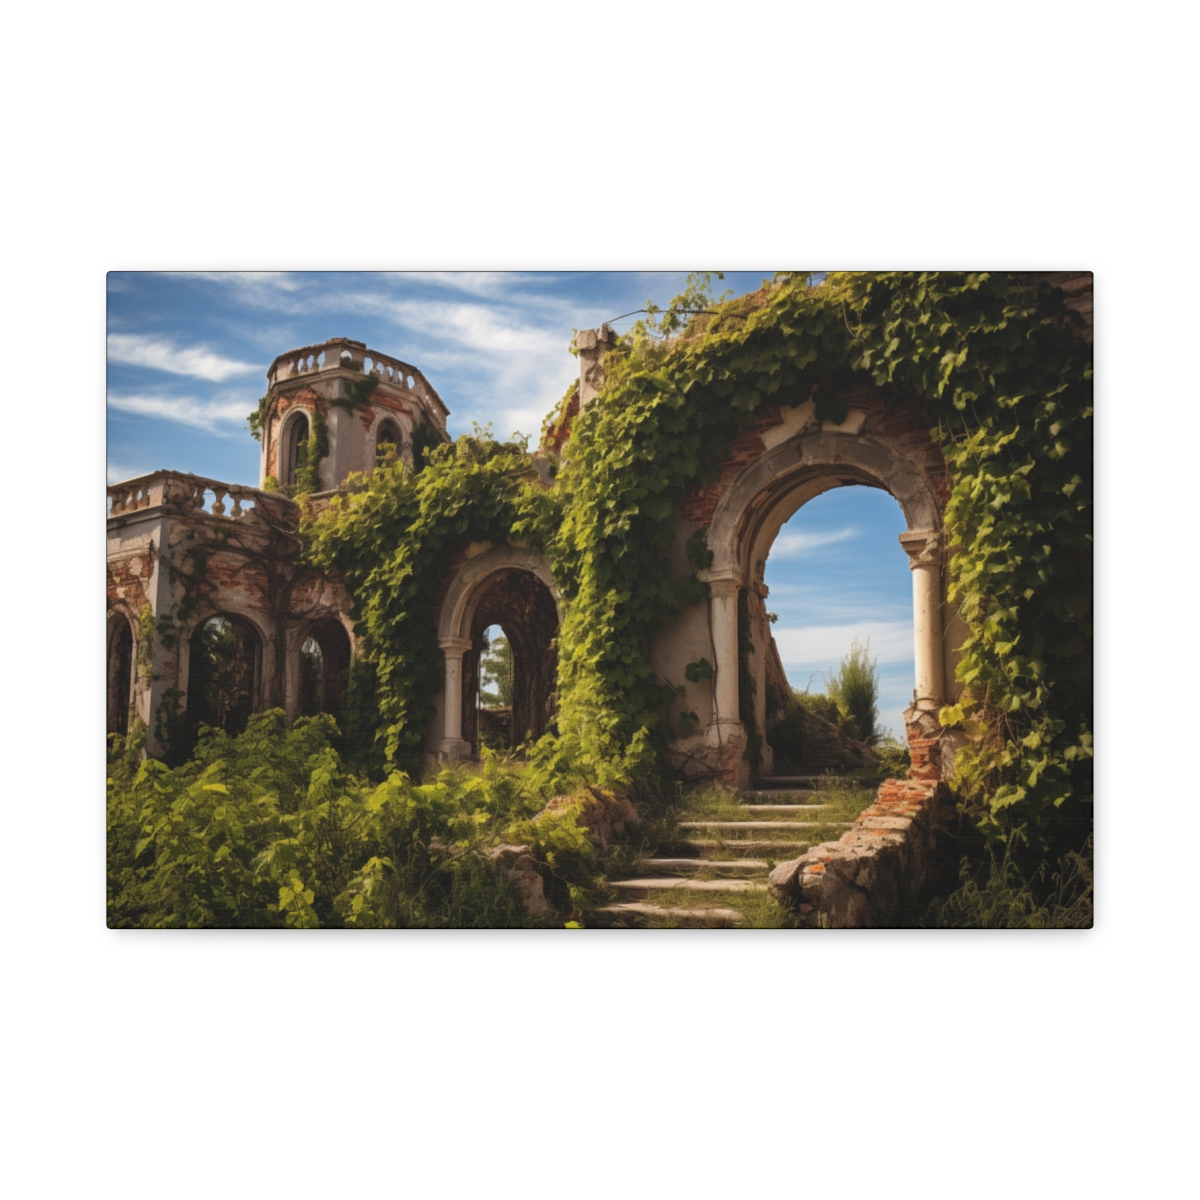 Sci-fi Art Canvas Print: We're The Only Humans Left